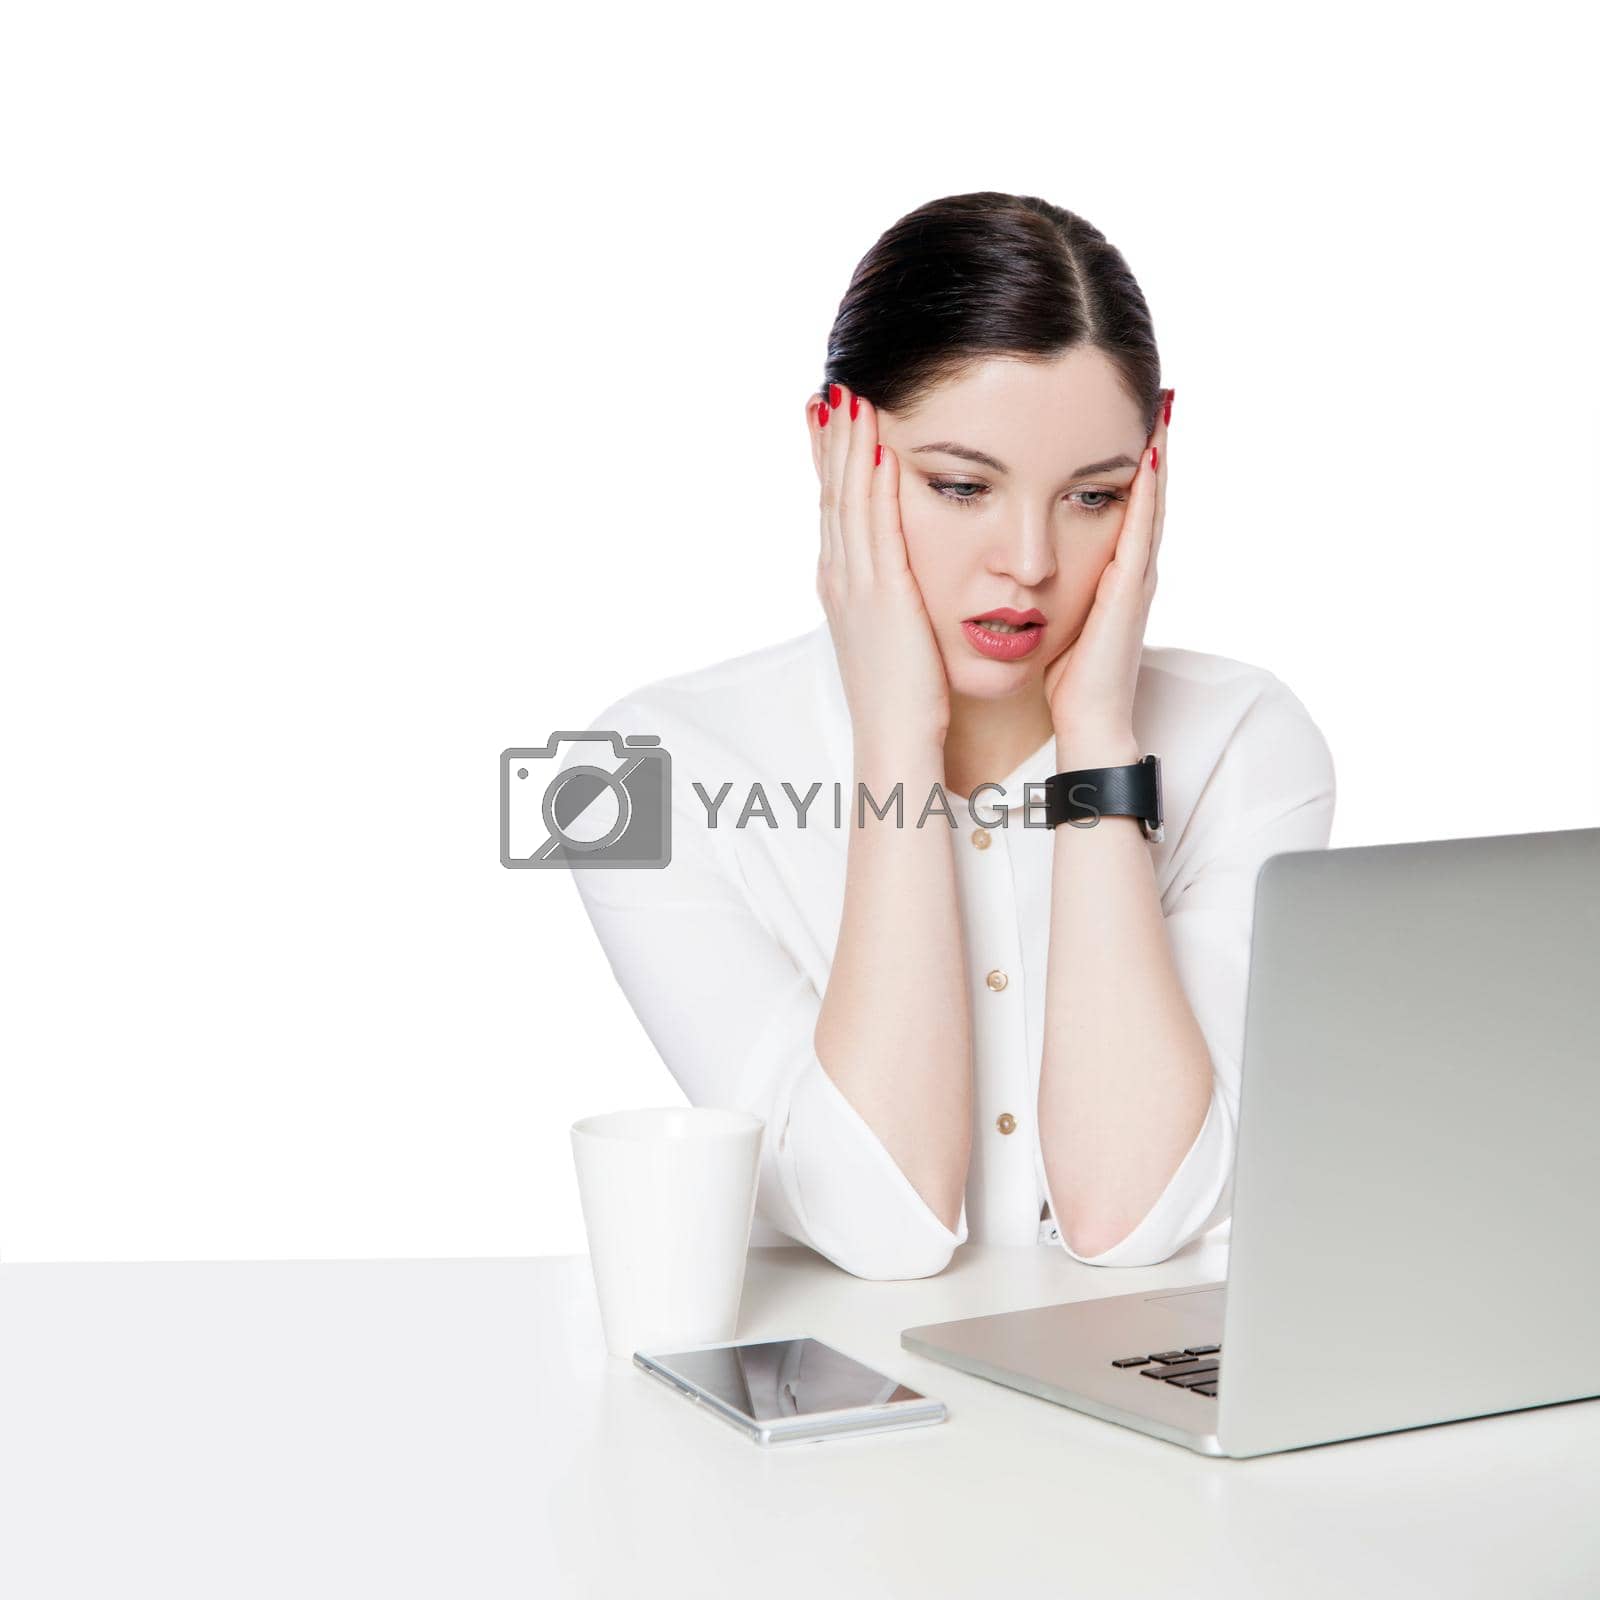 Royalty free image of Portrait of shocked attractive brunette businesswoman in white shirt sitting looking at laptop display, reading unbelievable news and confused. by Khosro1